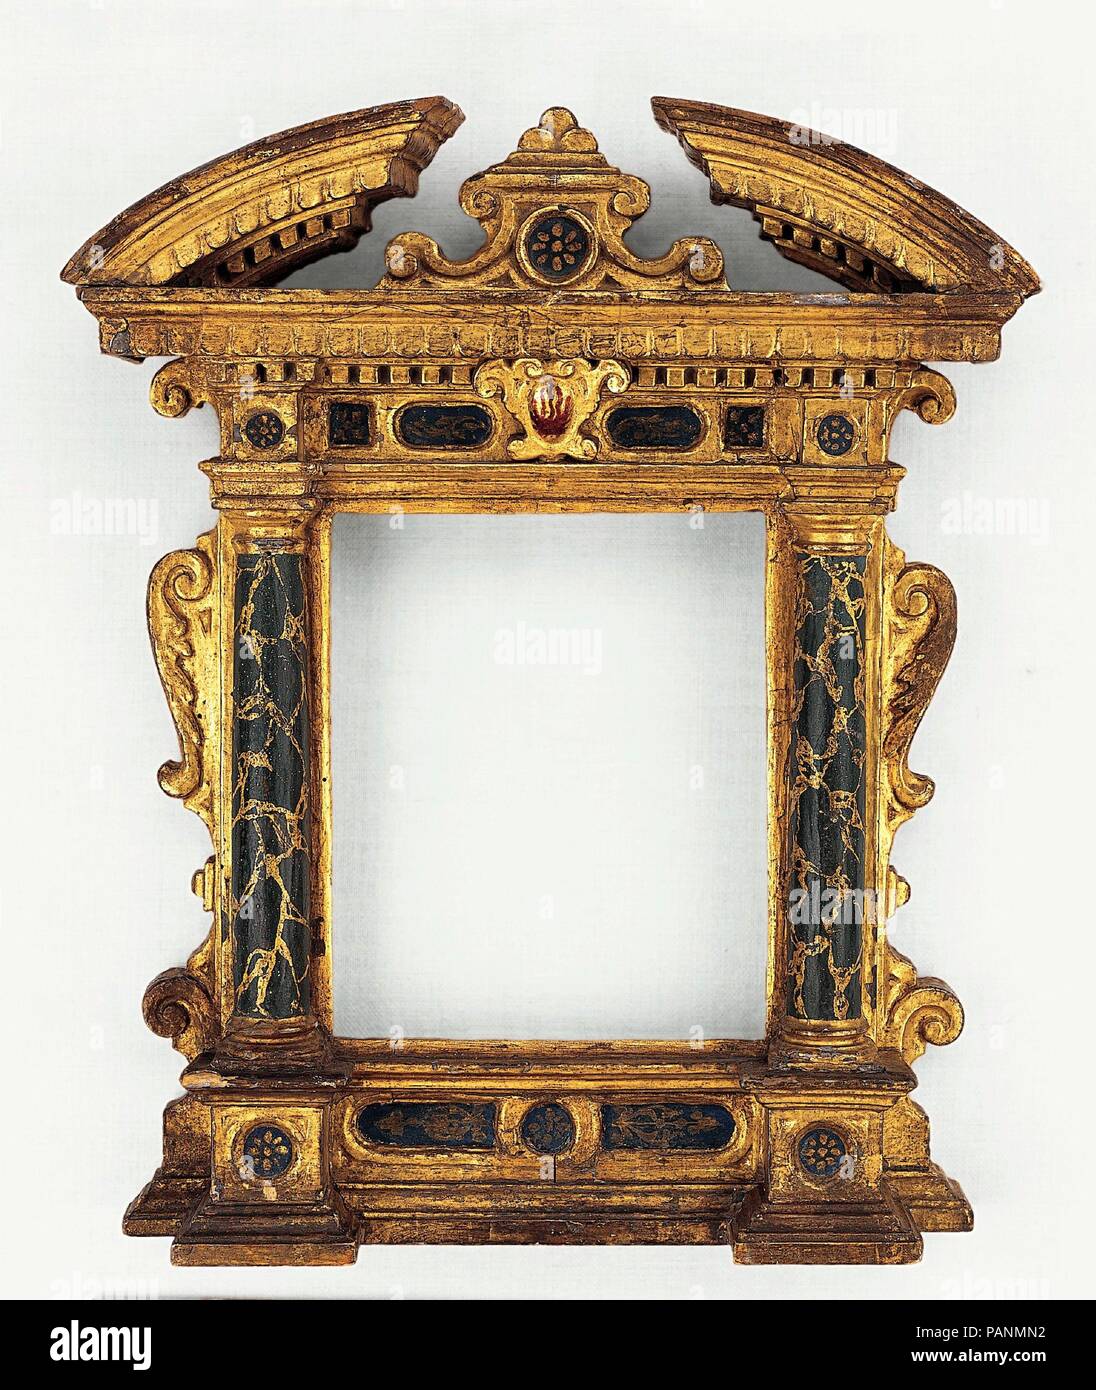 Tabernacle frame. Culture: Italian, Marches. Dimensions: Overall: 17 x 14 in. Date: early 17th century. Museum: Metropolitan Museum of Art, New York, USA. Stock Photo